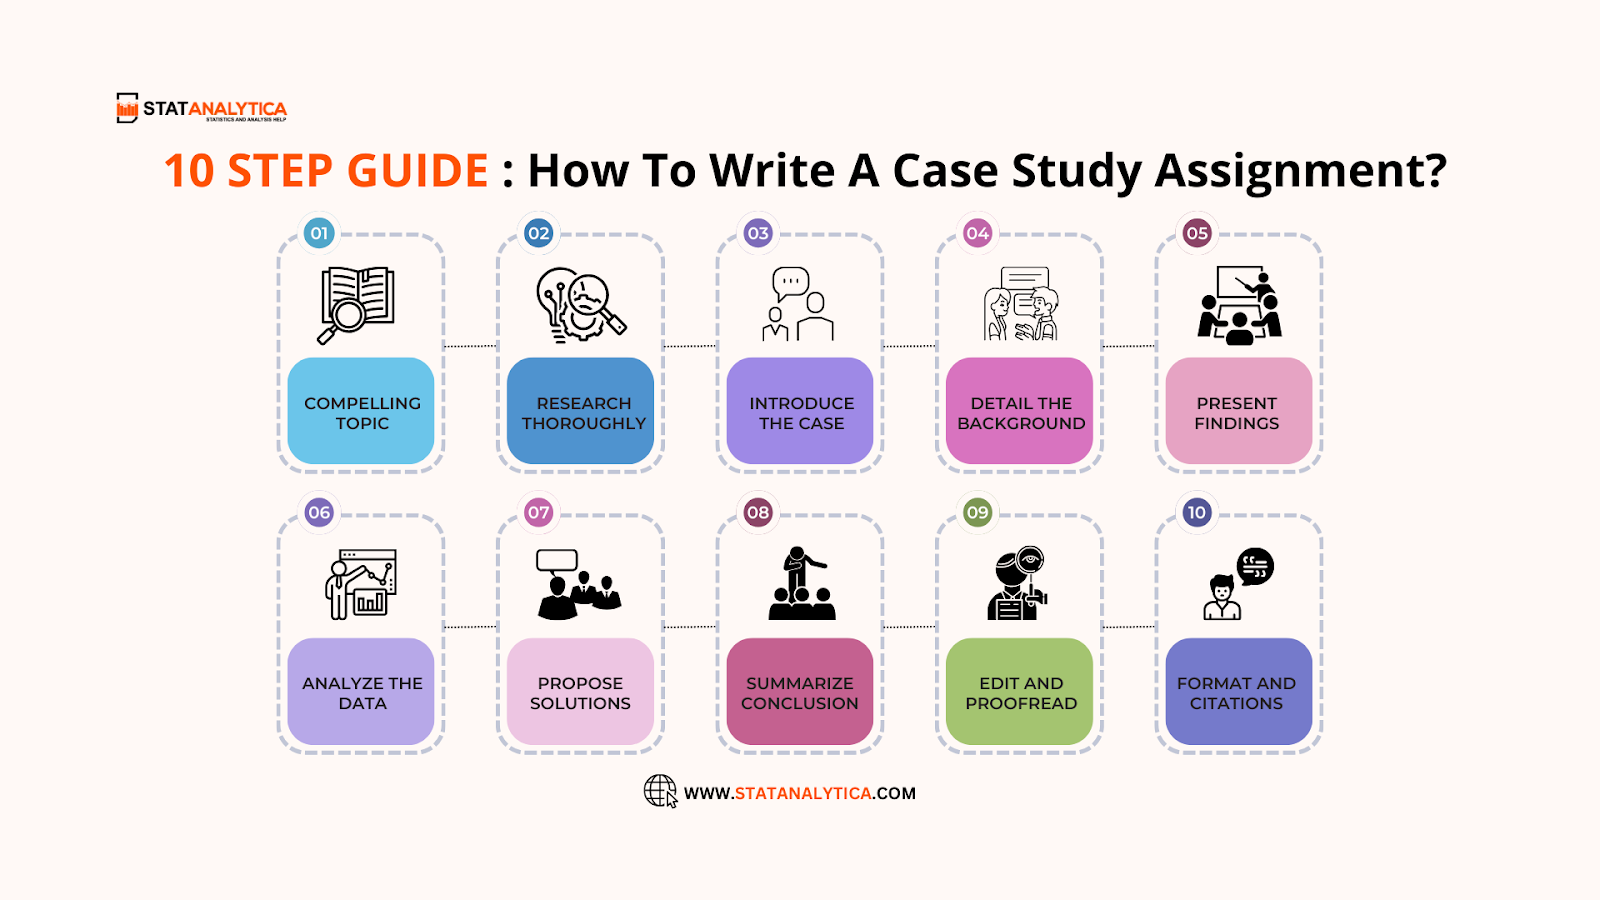 How to write a case study assignment